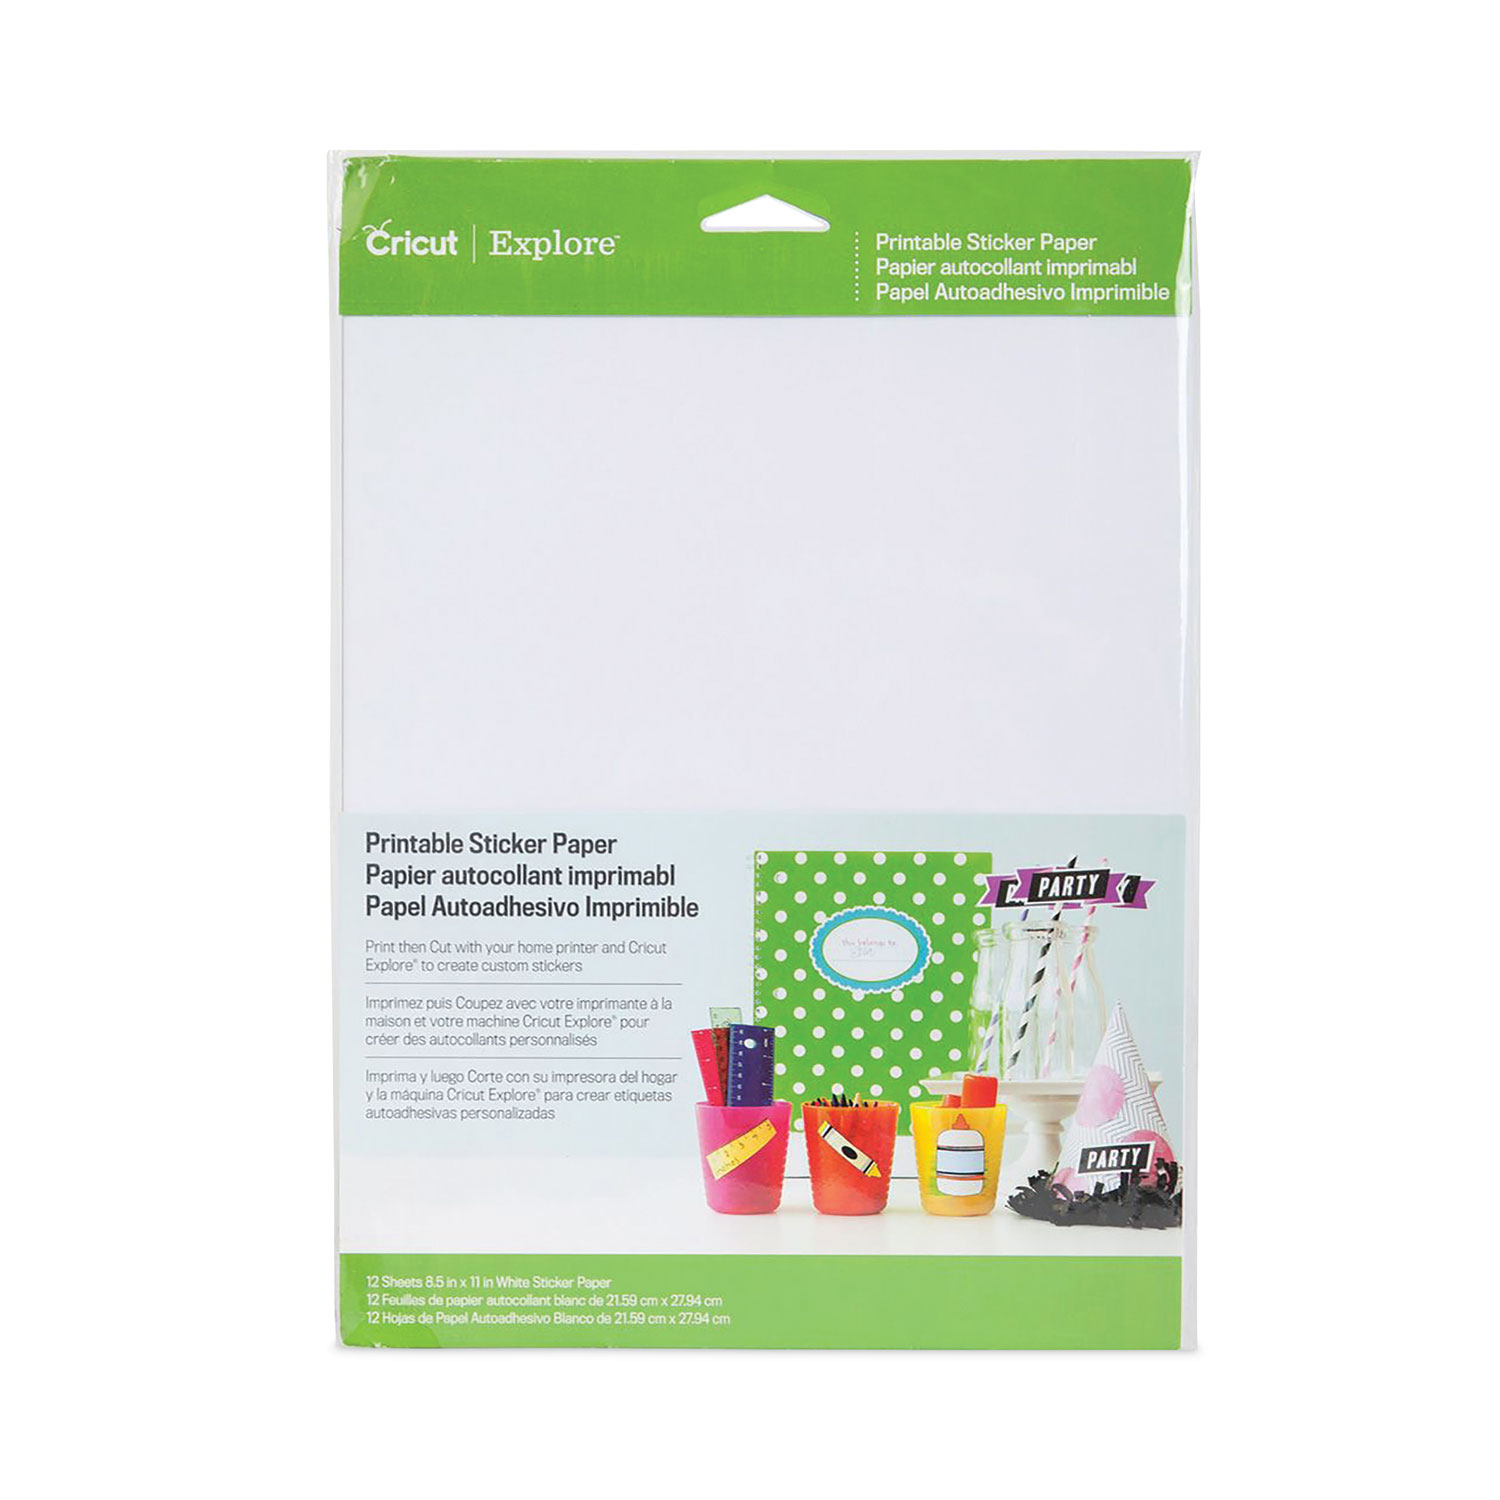 Explore Printable Sticker Paper, 8.5 x 11, White, 10/Pack - Office